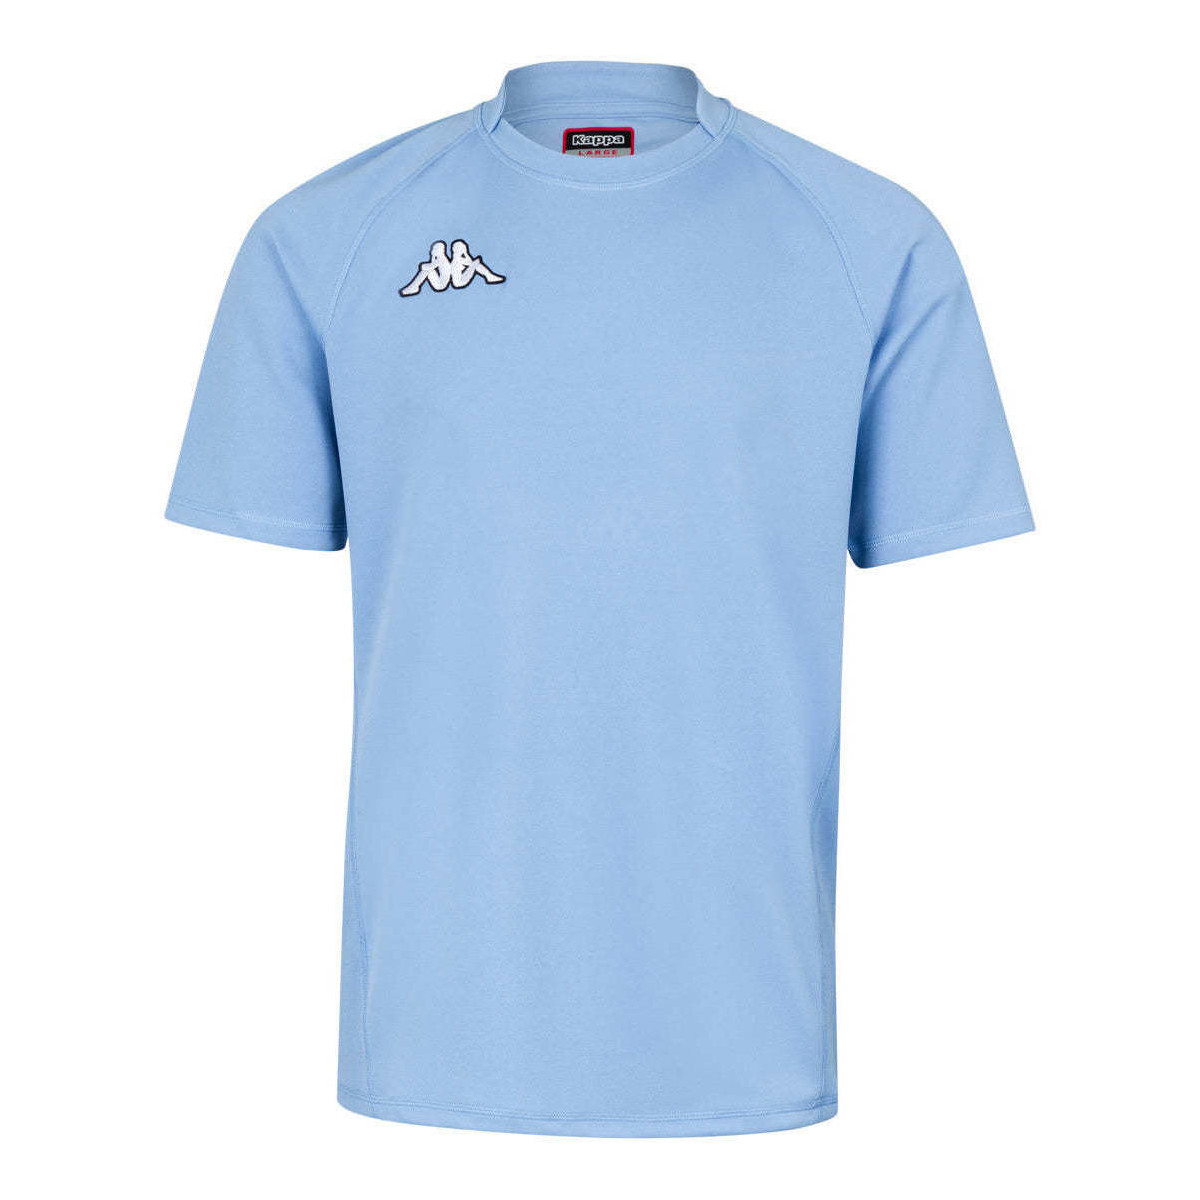 Kappa Bleu Maillot Rugby Telese UGE4Lo3k